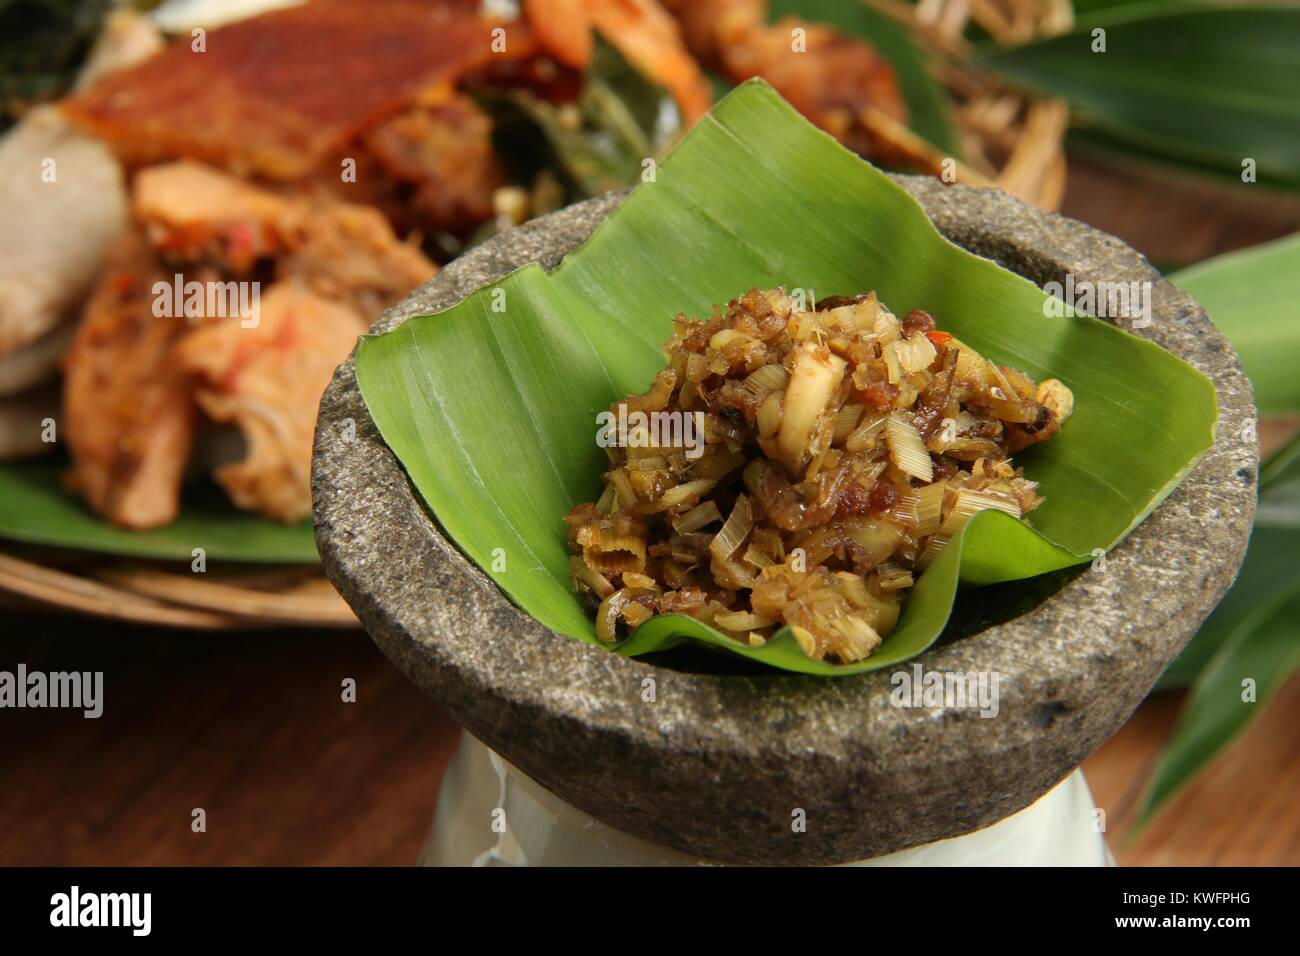 Sambal Sere Tabia. Balinese spicy relish of chili peppers and lemongrass. Stock Photo